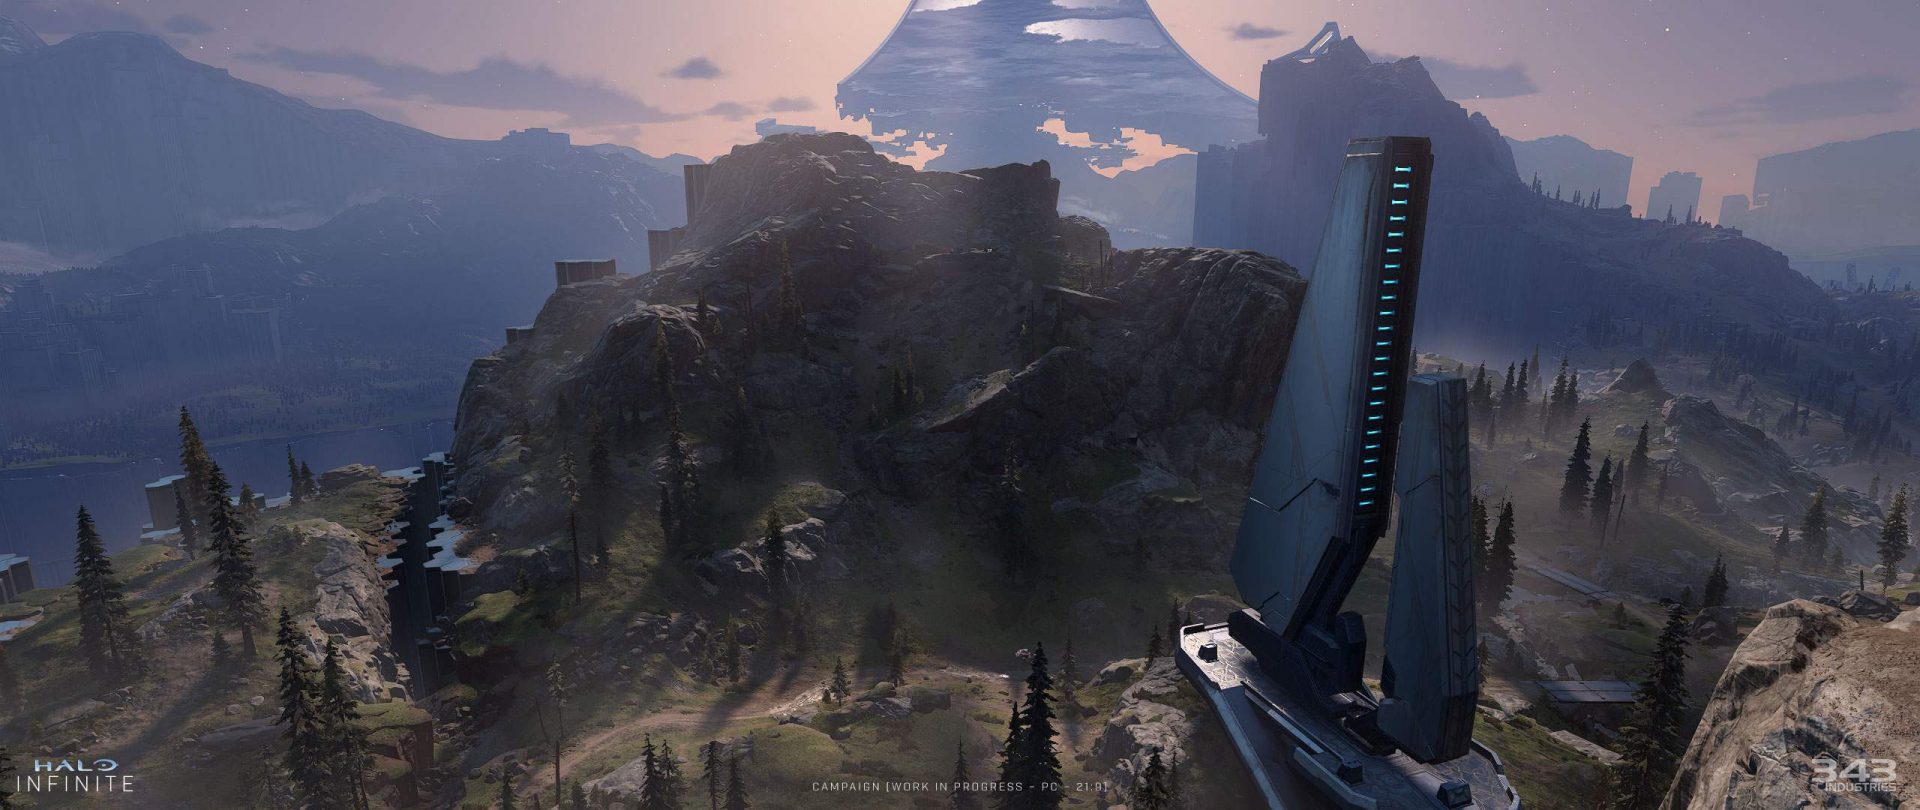 Preview- Halo Infinite: The Safe Formula, With a Fresh World